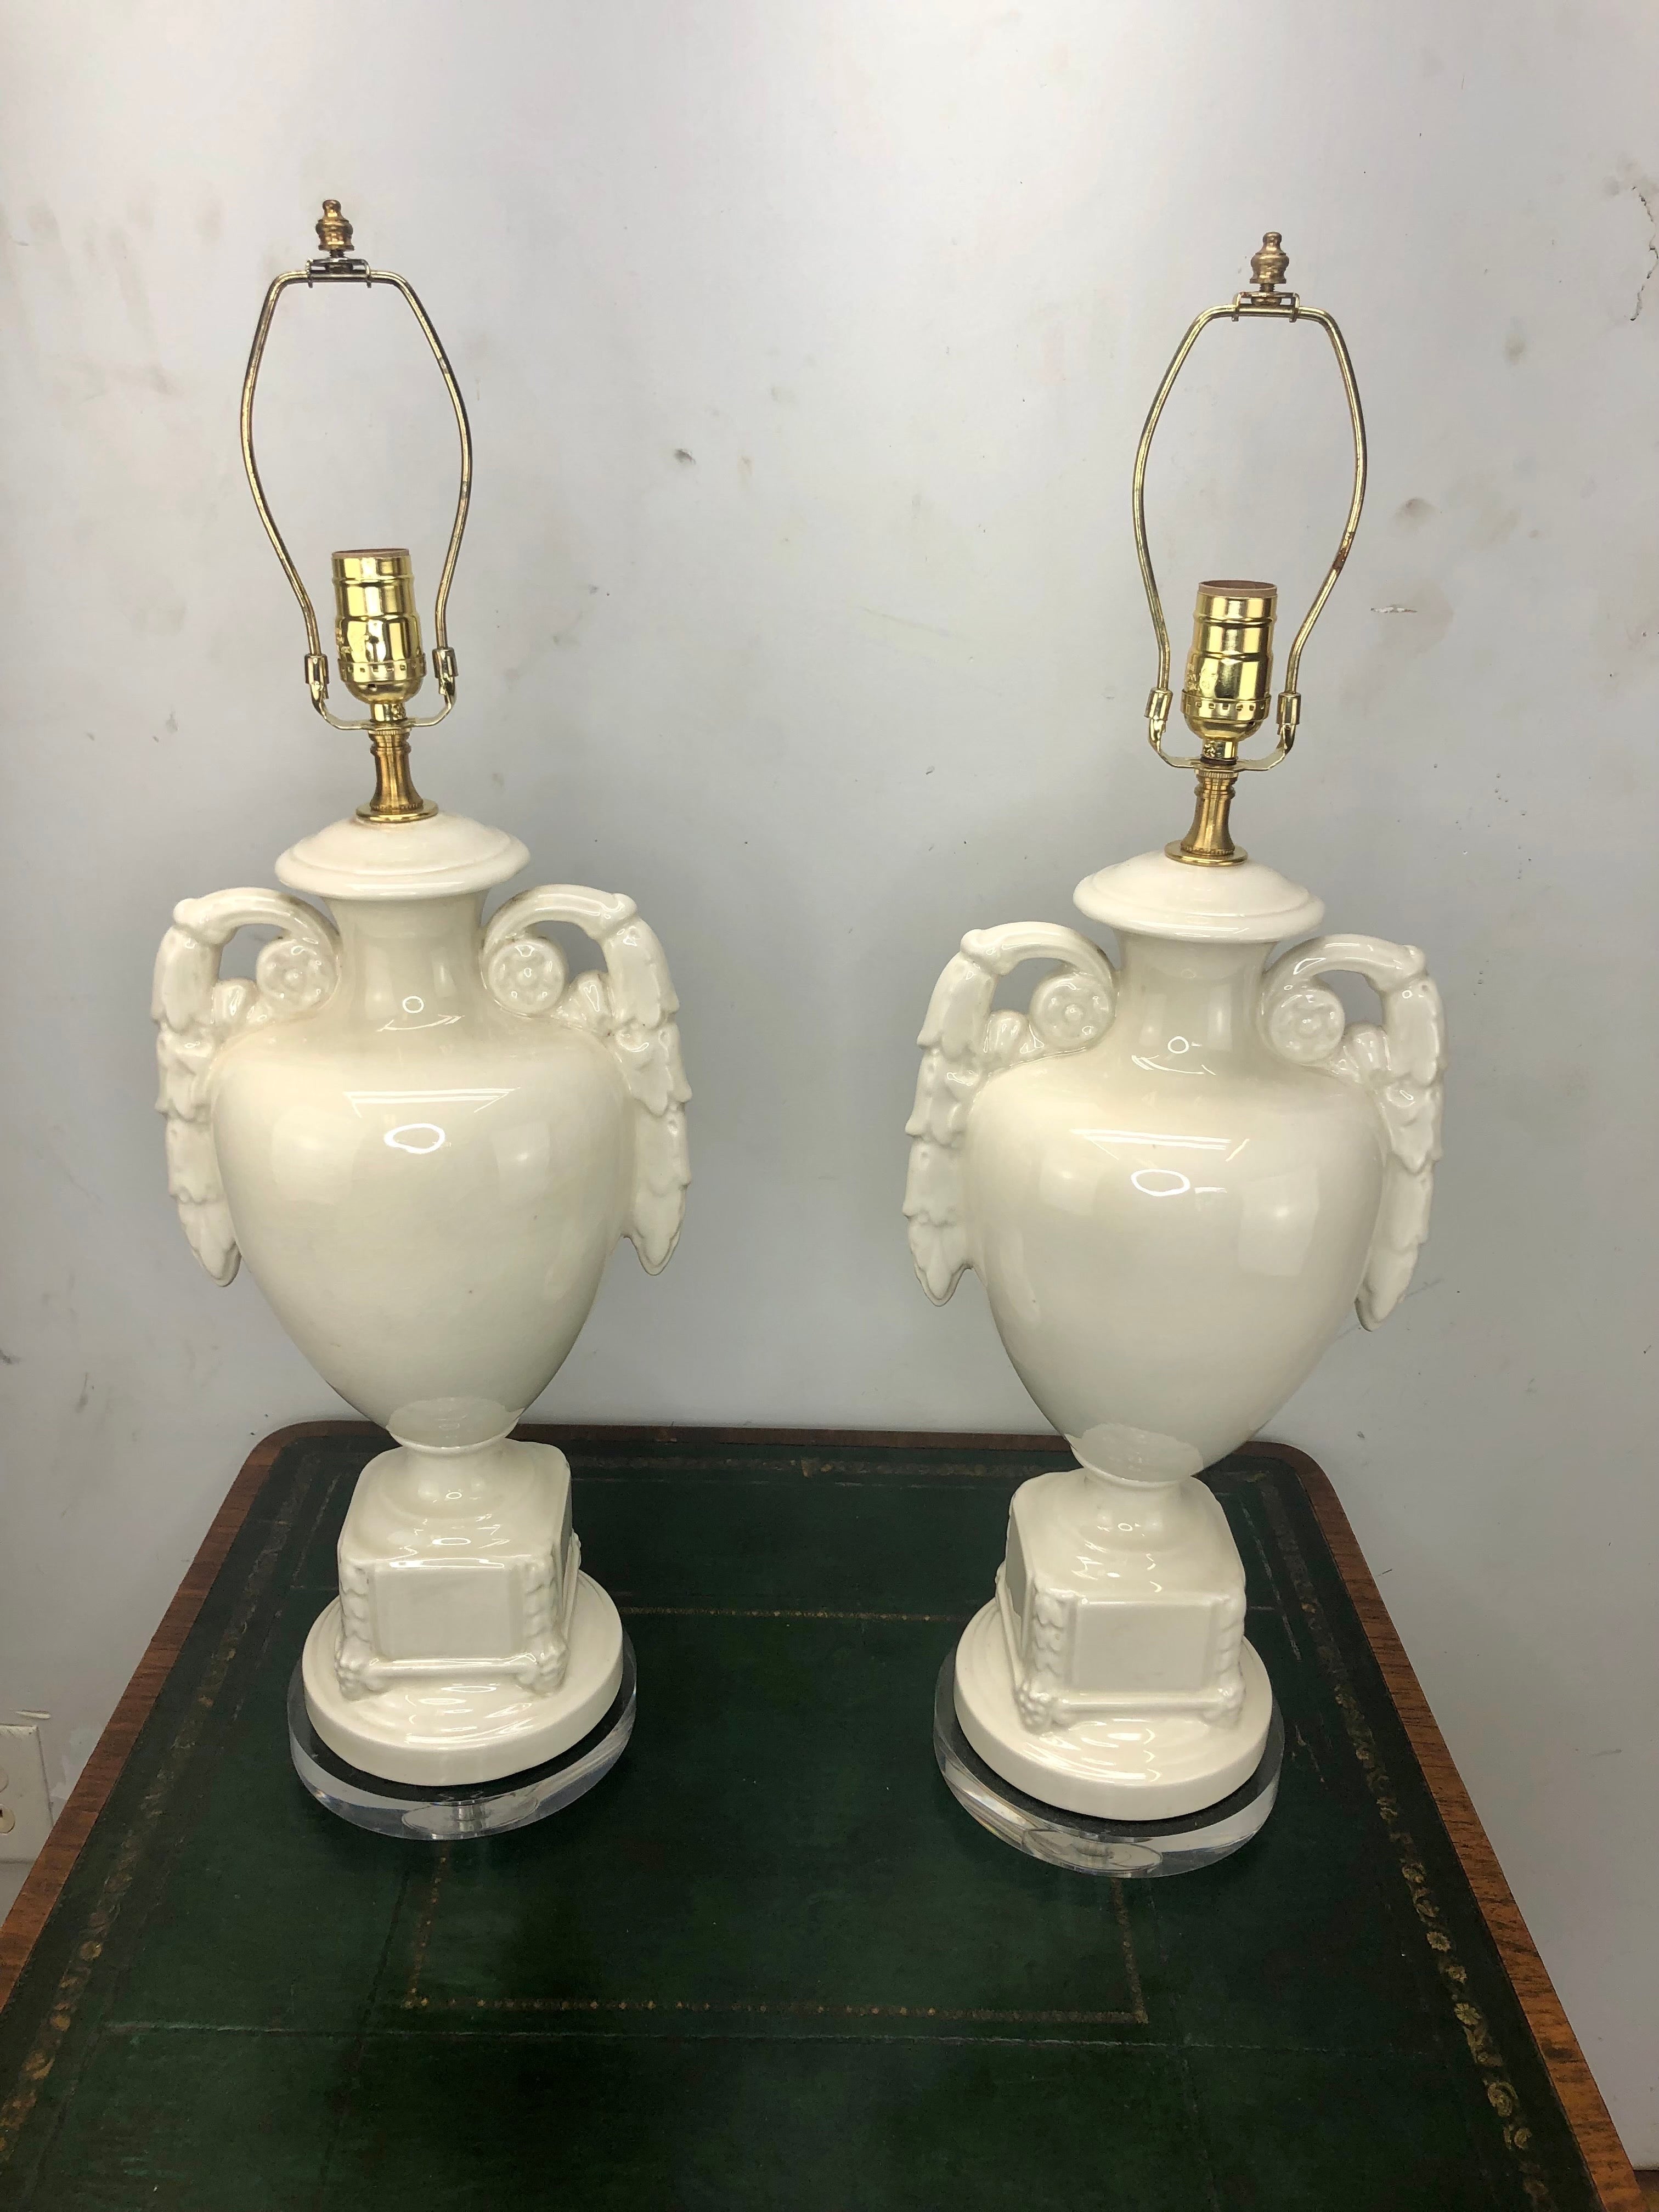 Pair of Vintage Italian Glazed Ceramic Urn Lamps. These white glazed ceramic lamps have new lucite bases and have been newly wired, new 3-way sockets.